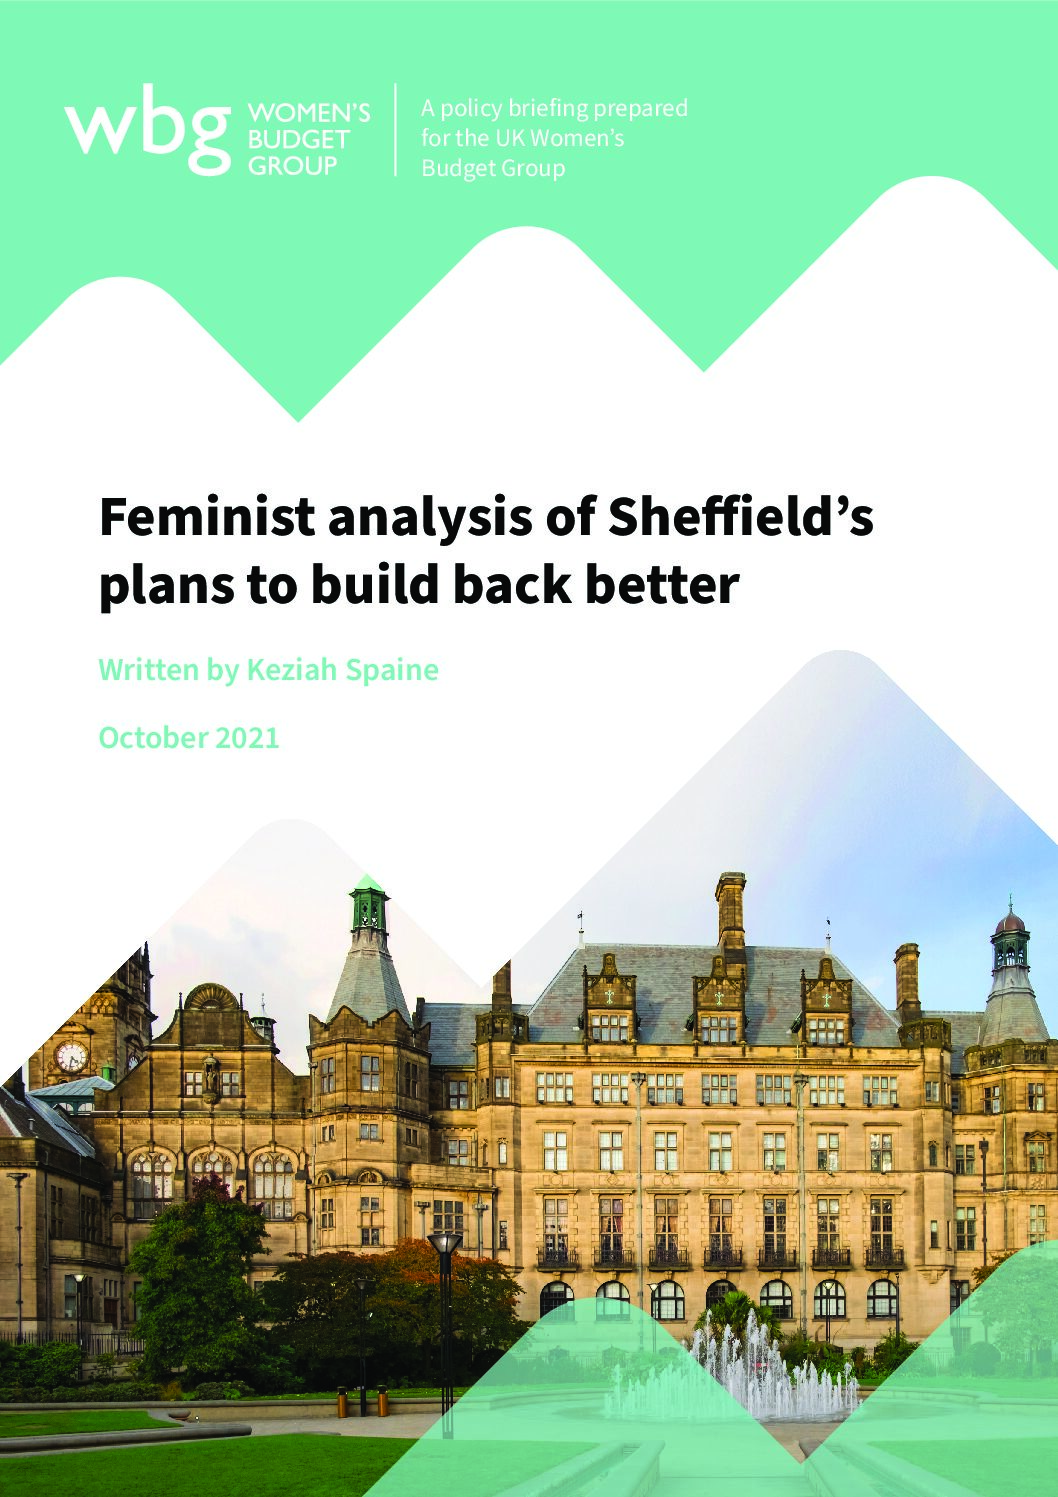 A feminist analysis of Sheffield’s plans to build back better